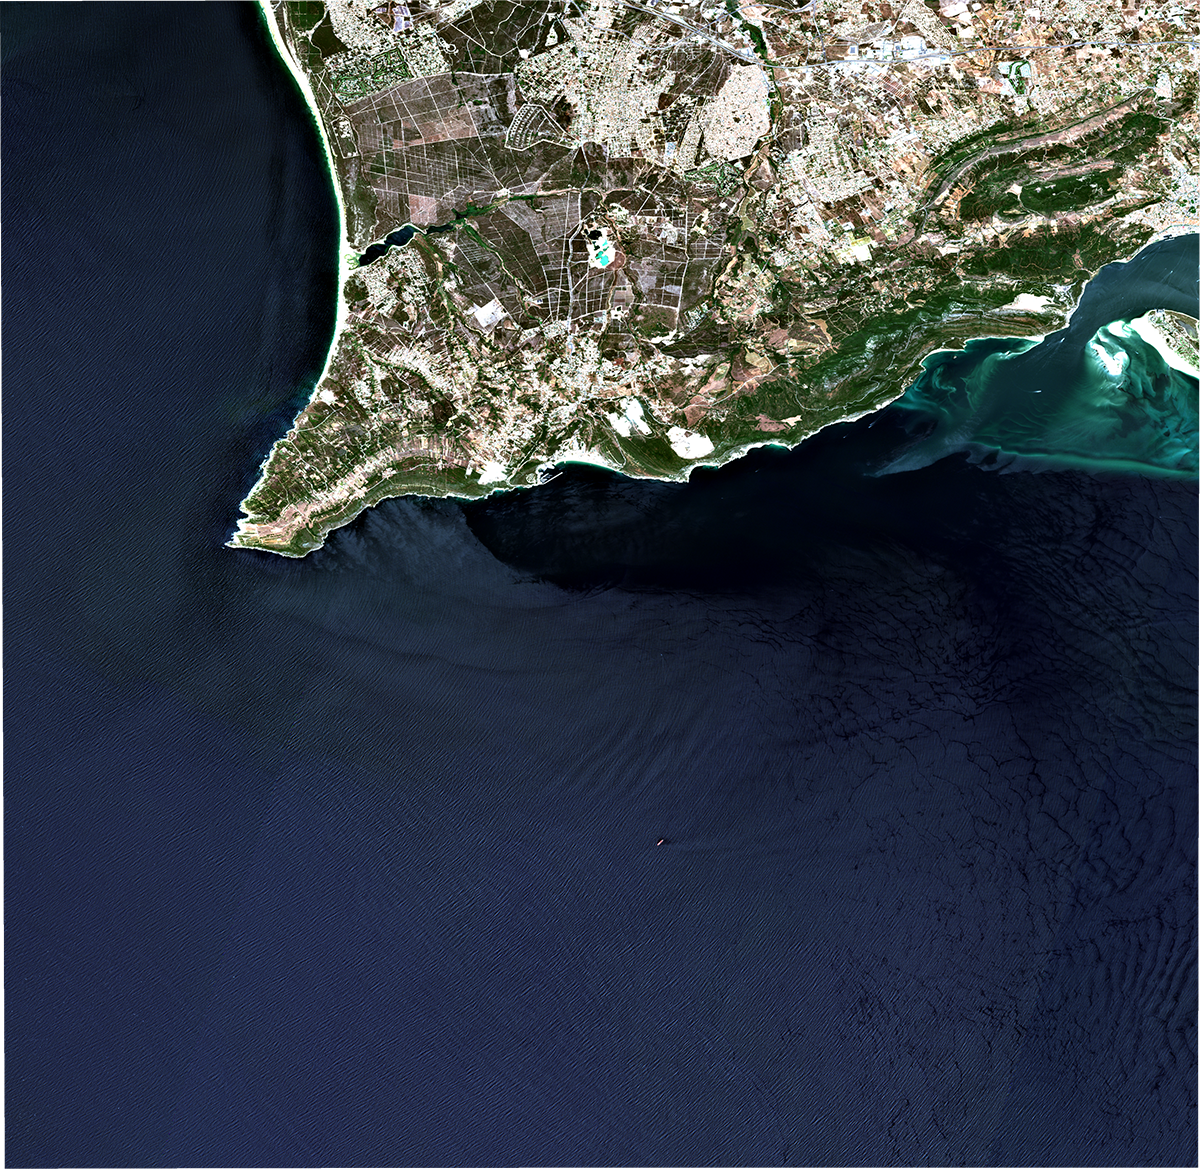 Region of Influence of Sado Estuary - RGB composite - Acquired on 14 July 2017 at 11:21 UTC by Sentinel-2A (ESA), this image shows the turbid features propagation from the shallower region close the estuary mouth towards ocean during a ebb period